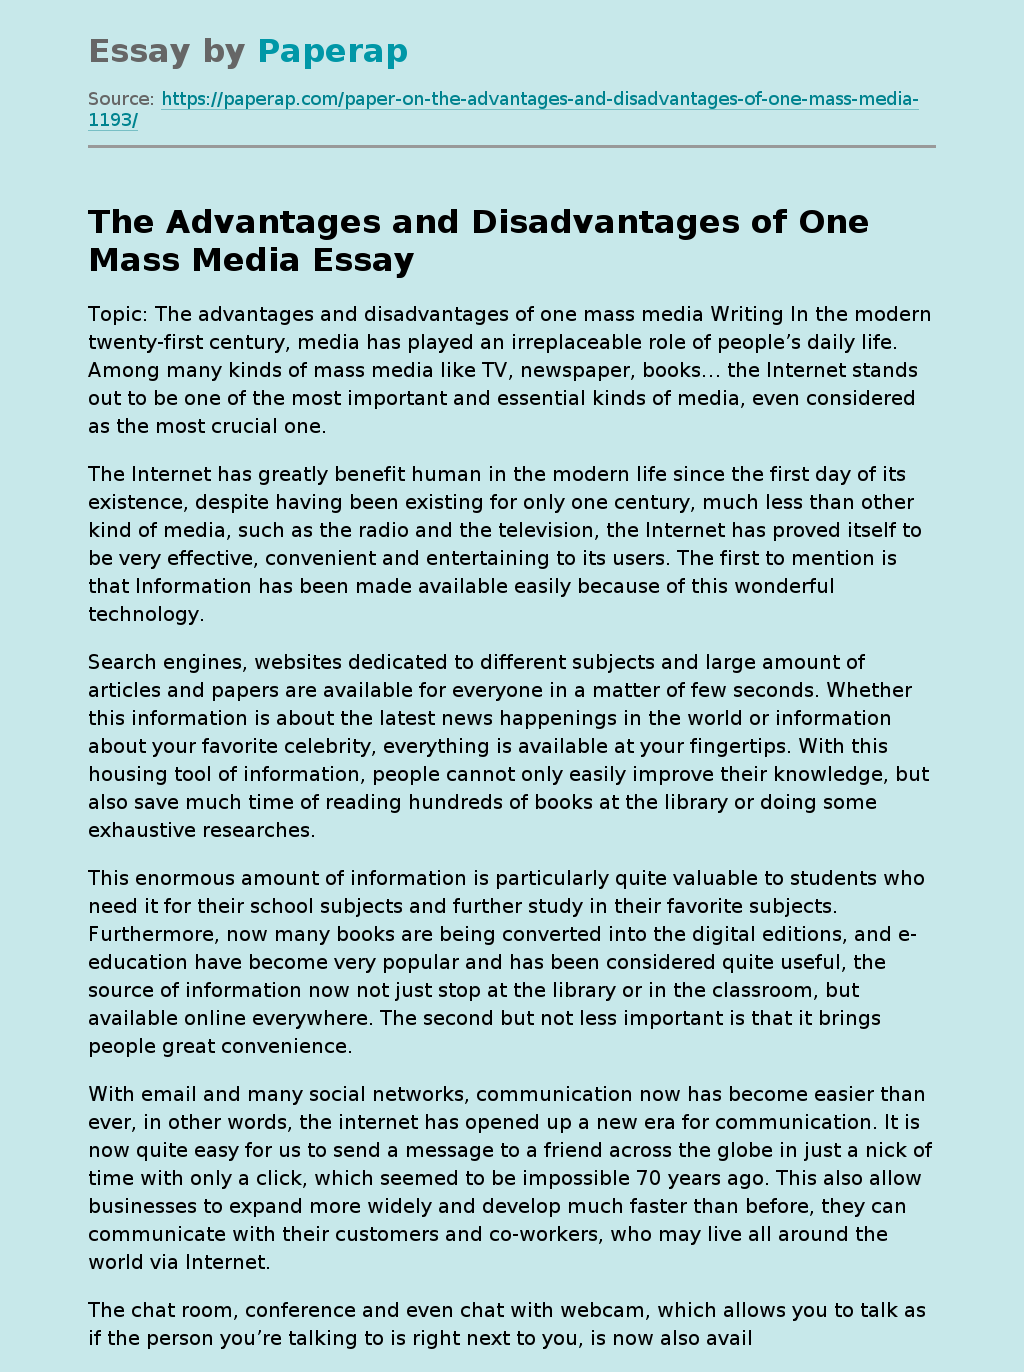 The Advantages and Disadvantages of One Mass Media